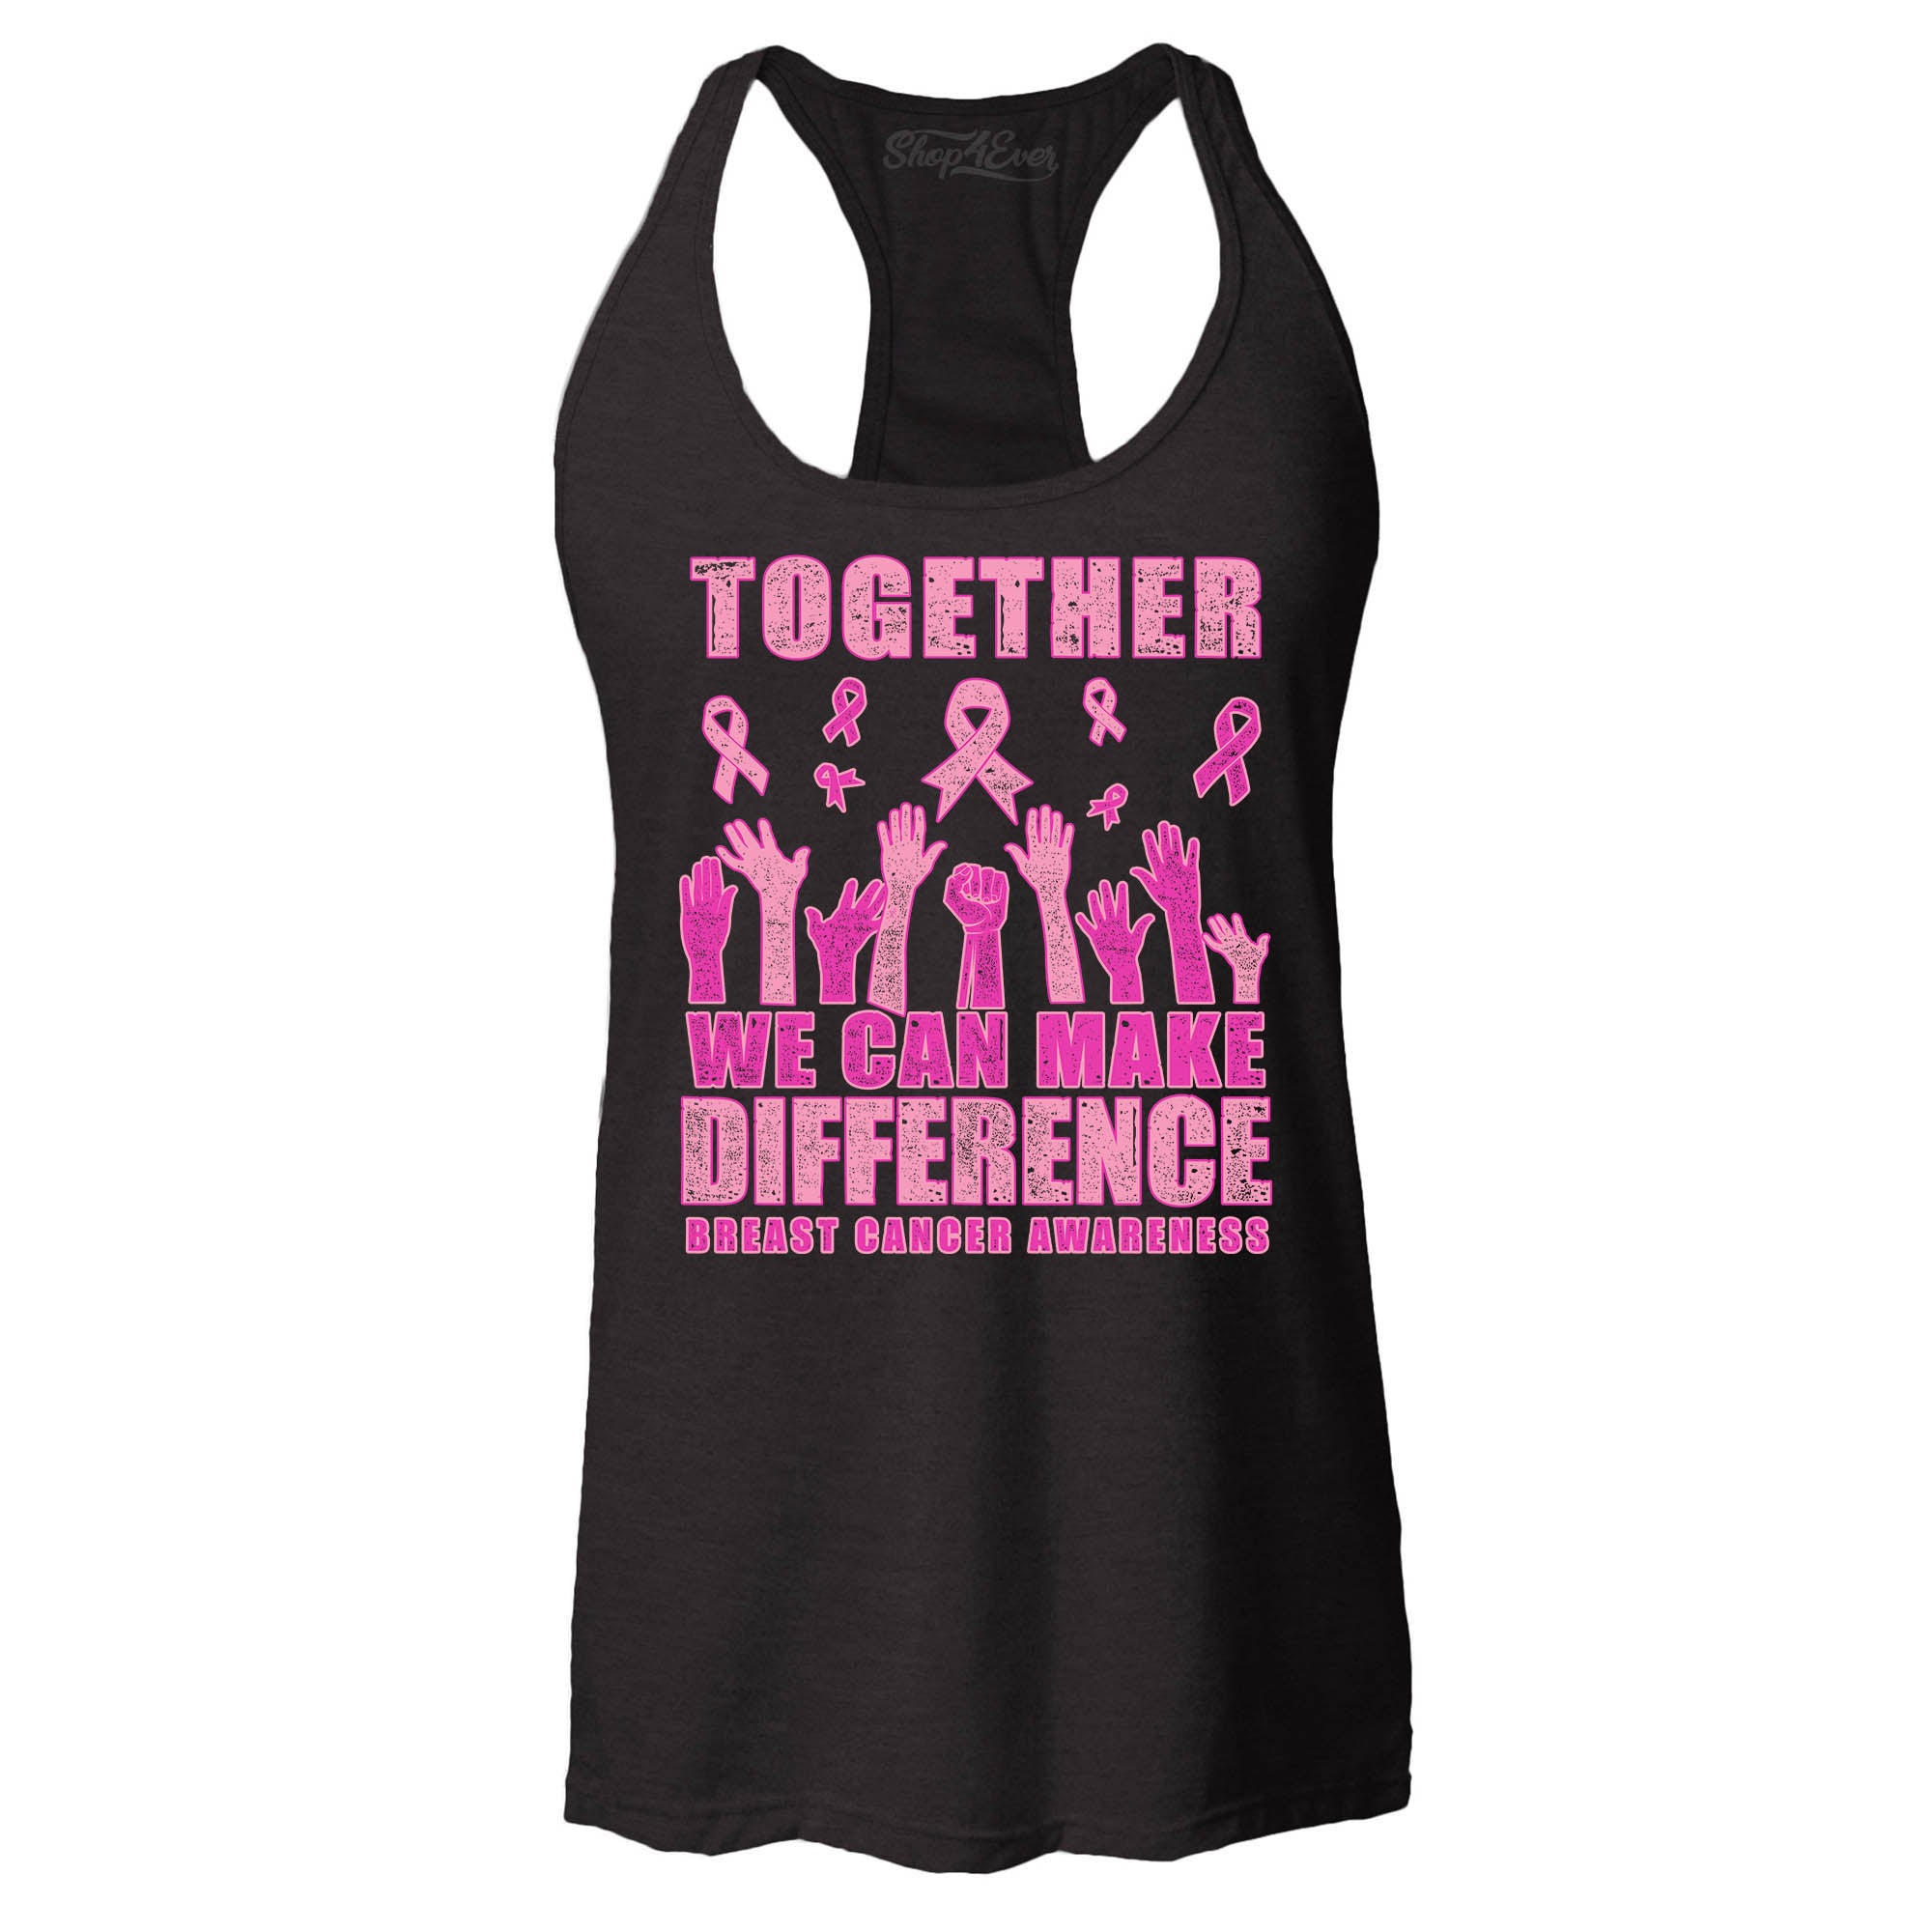 Together We Can Make A Difference Breast Cancer Awareness Women's Racerback Tank Top Slim Fit